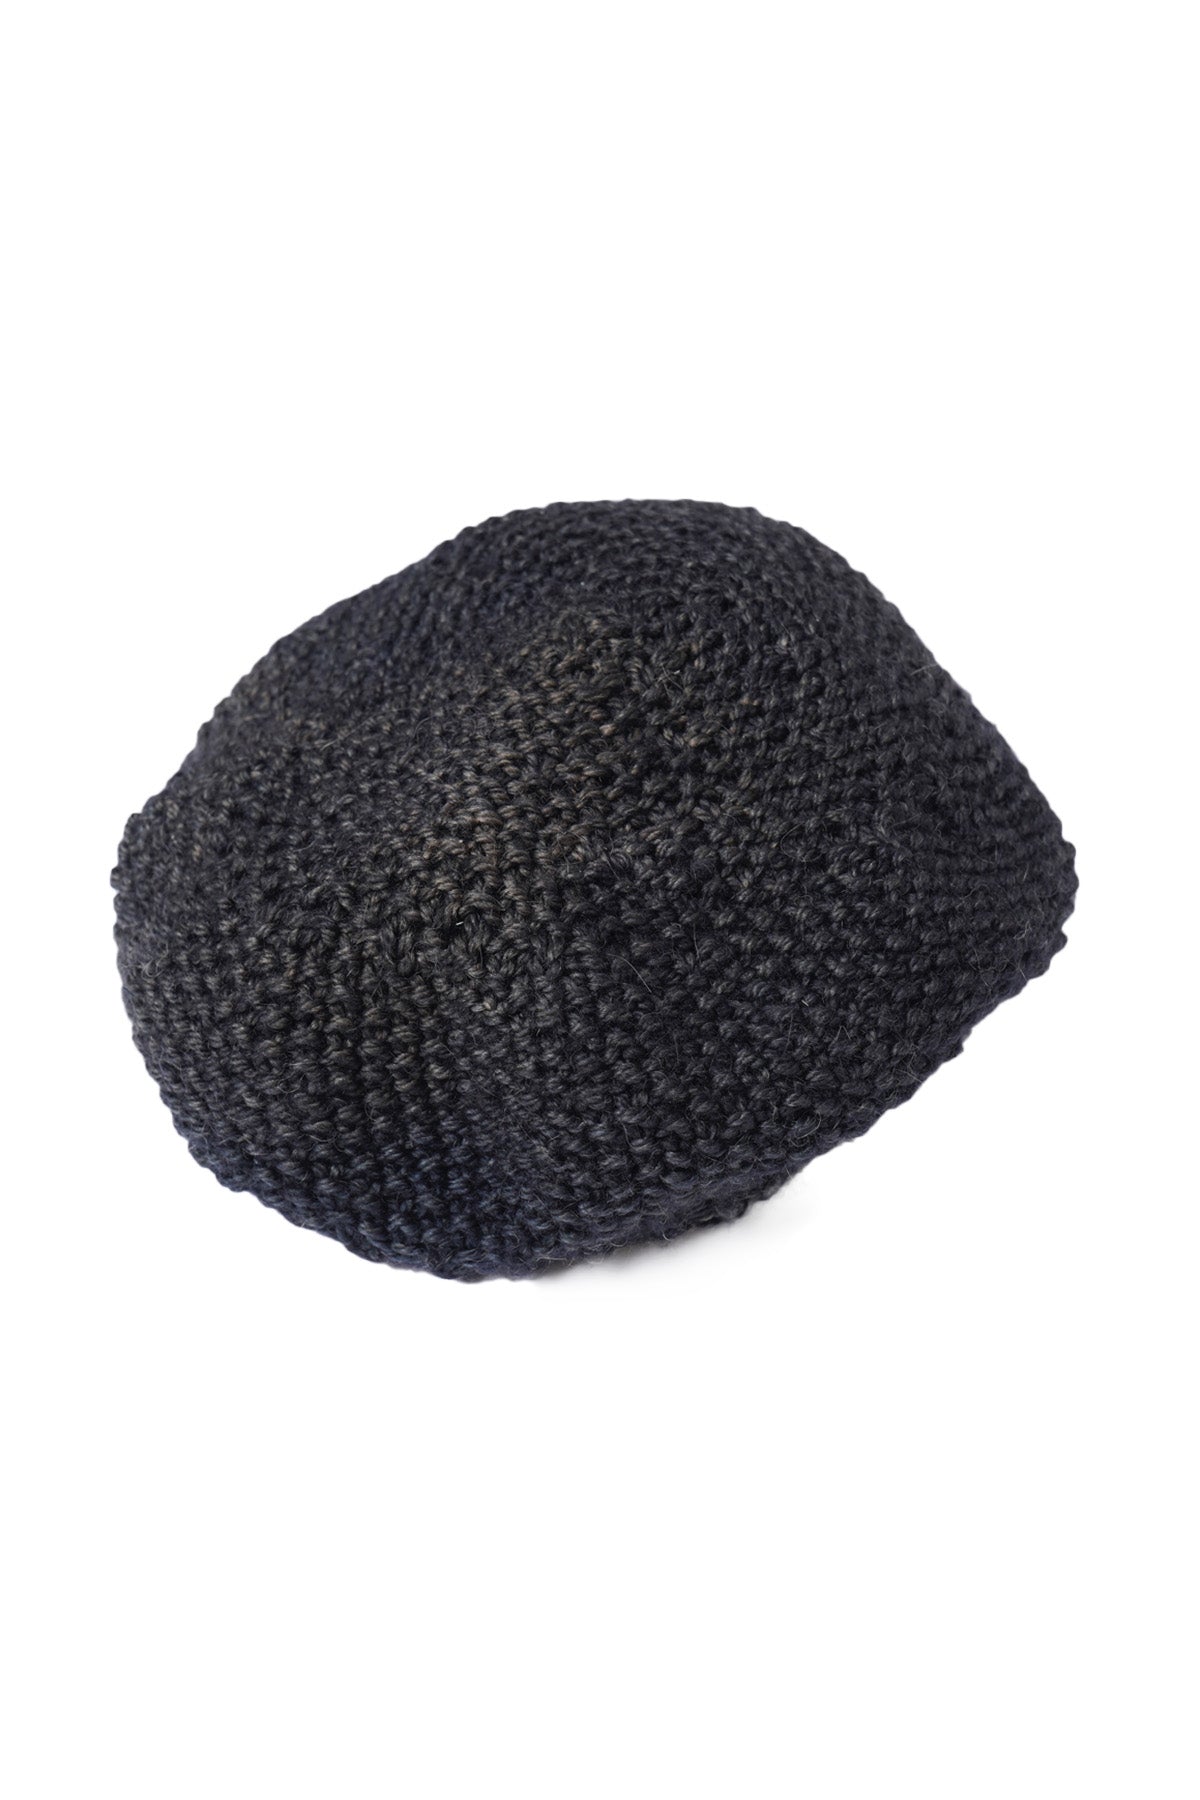 Hand Knitted Beret